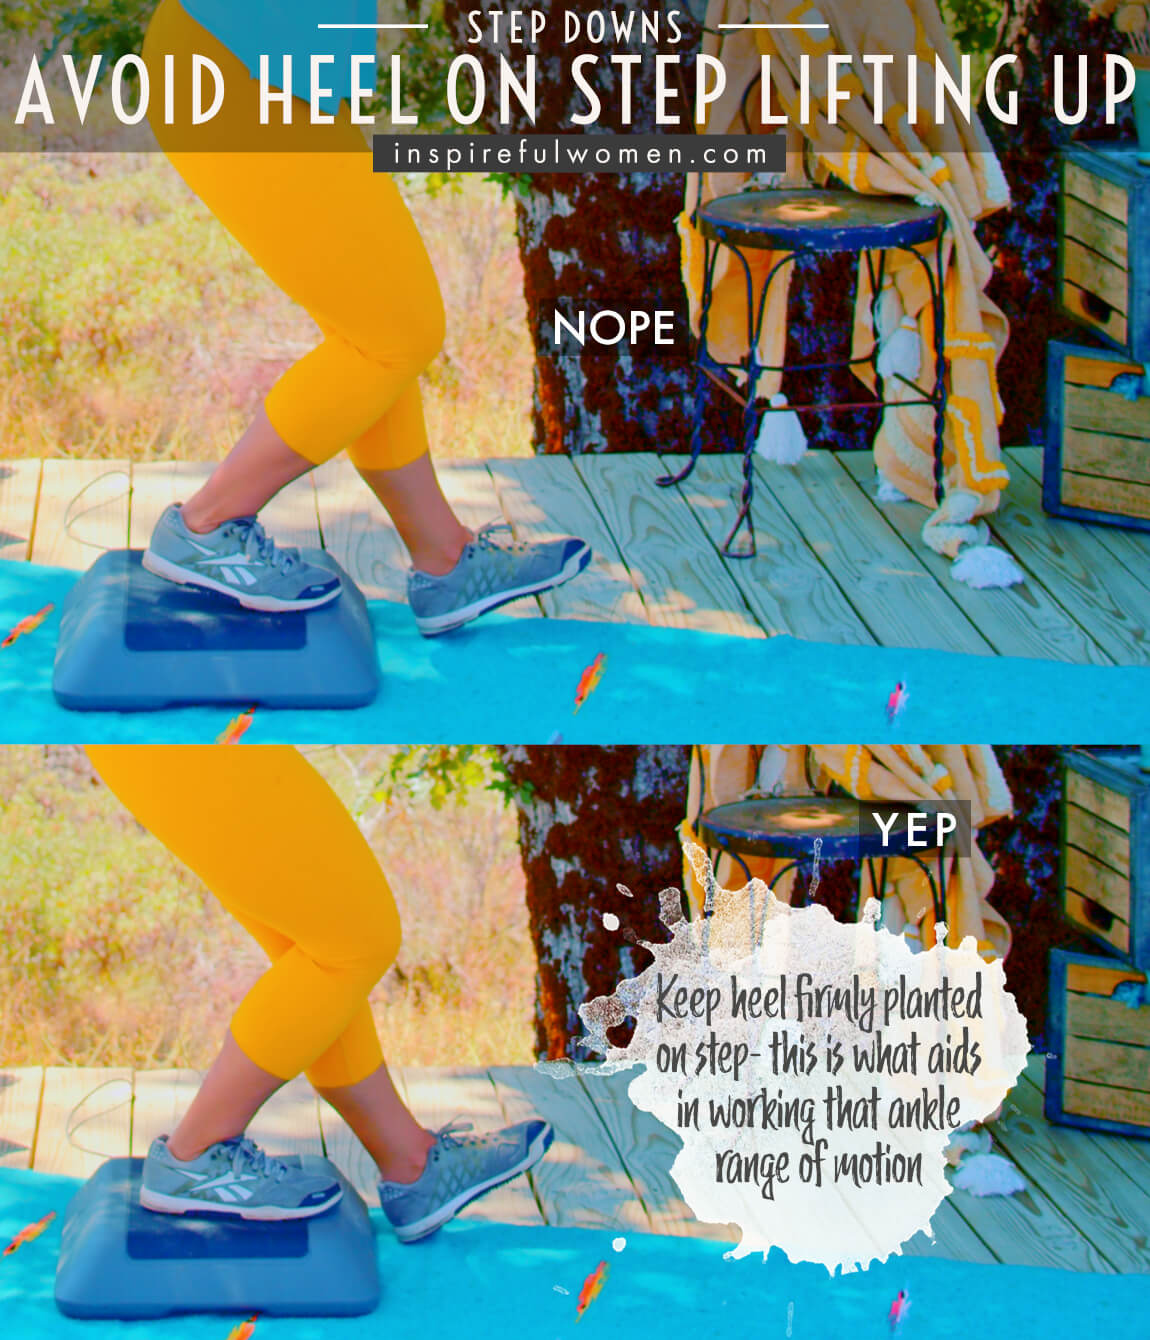 avoid-heel-on-step-lifting-up-box-step-downs-proper-form